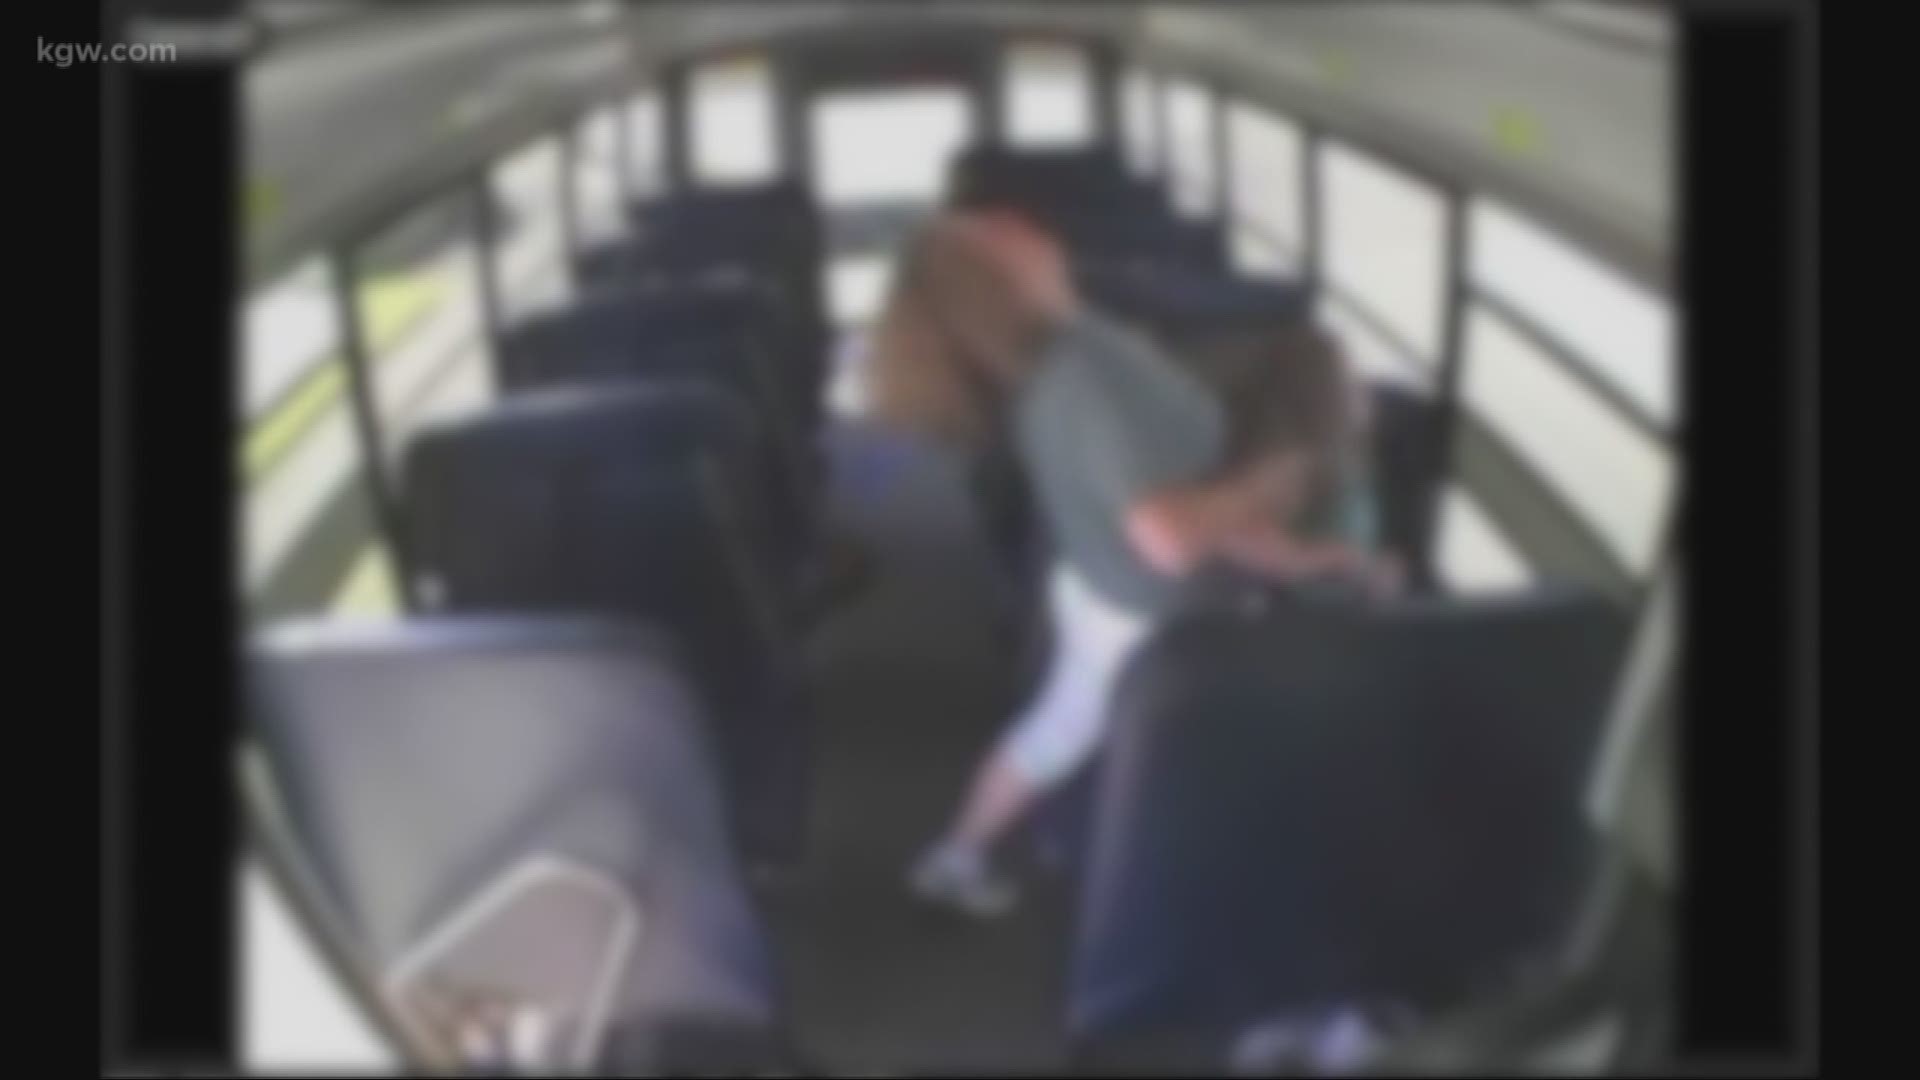 We continue our coverage of the attacks on school bus drivers in our Classrooms in Crisis series.